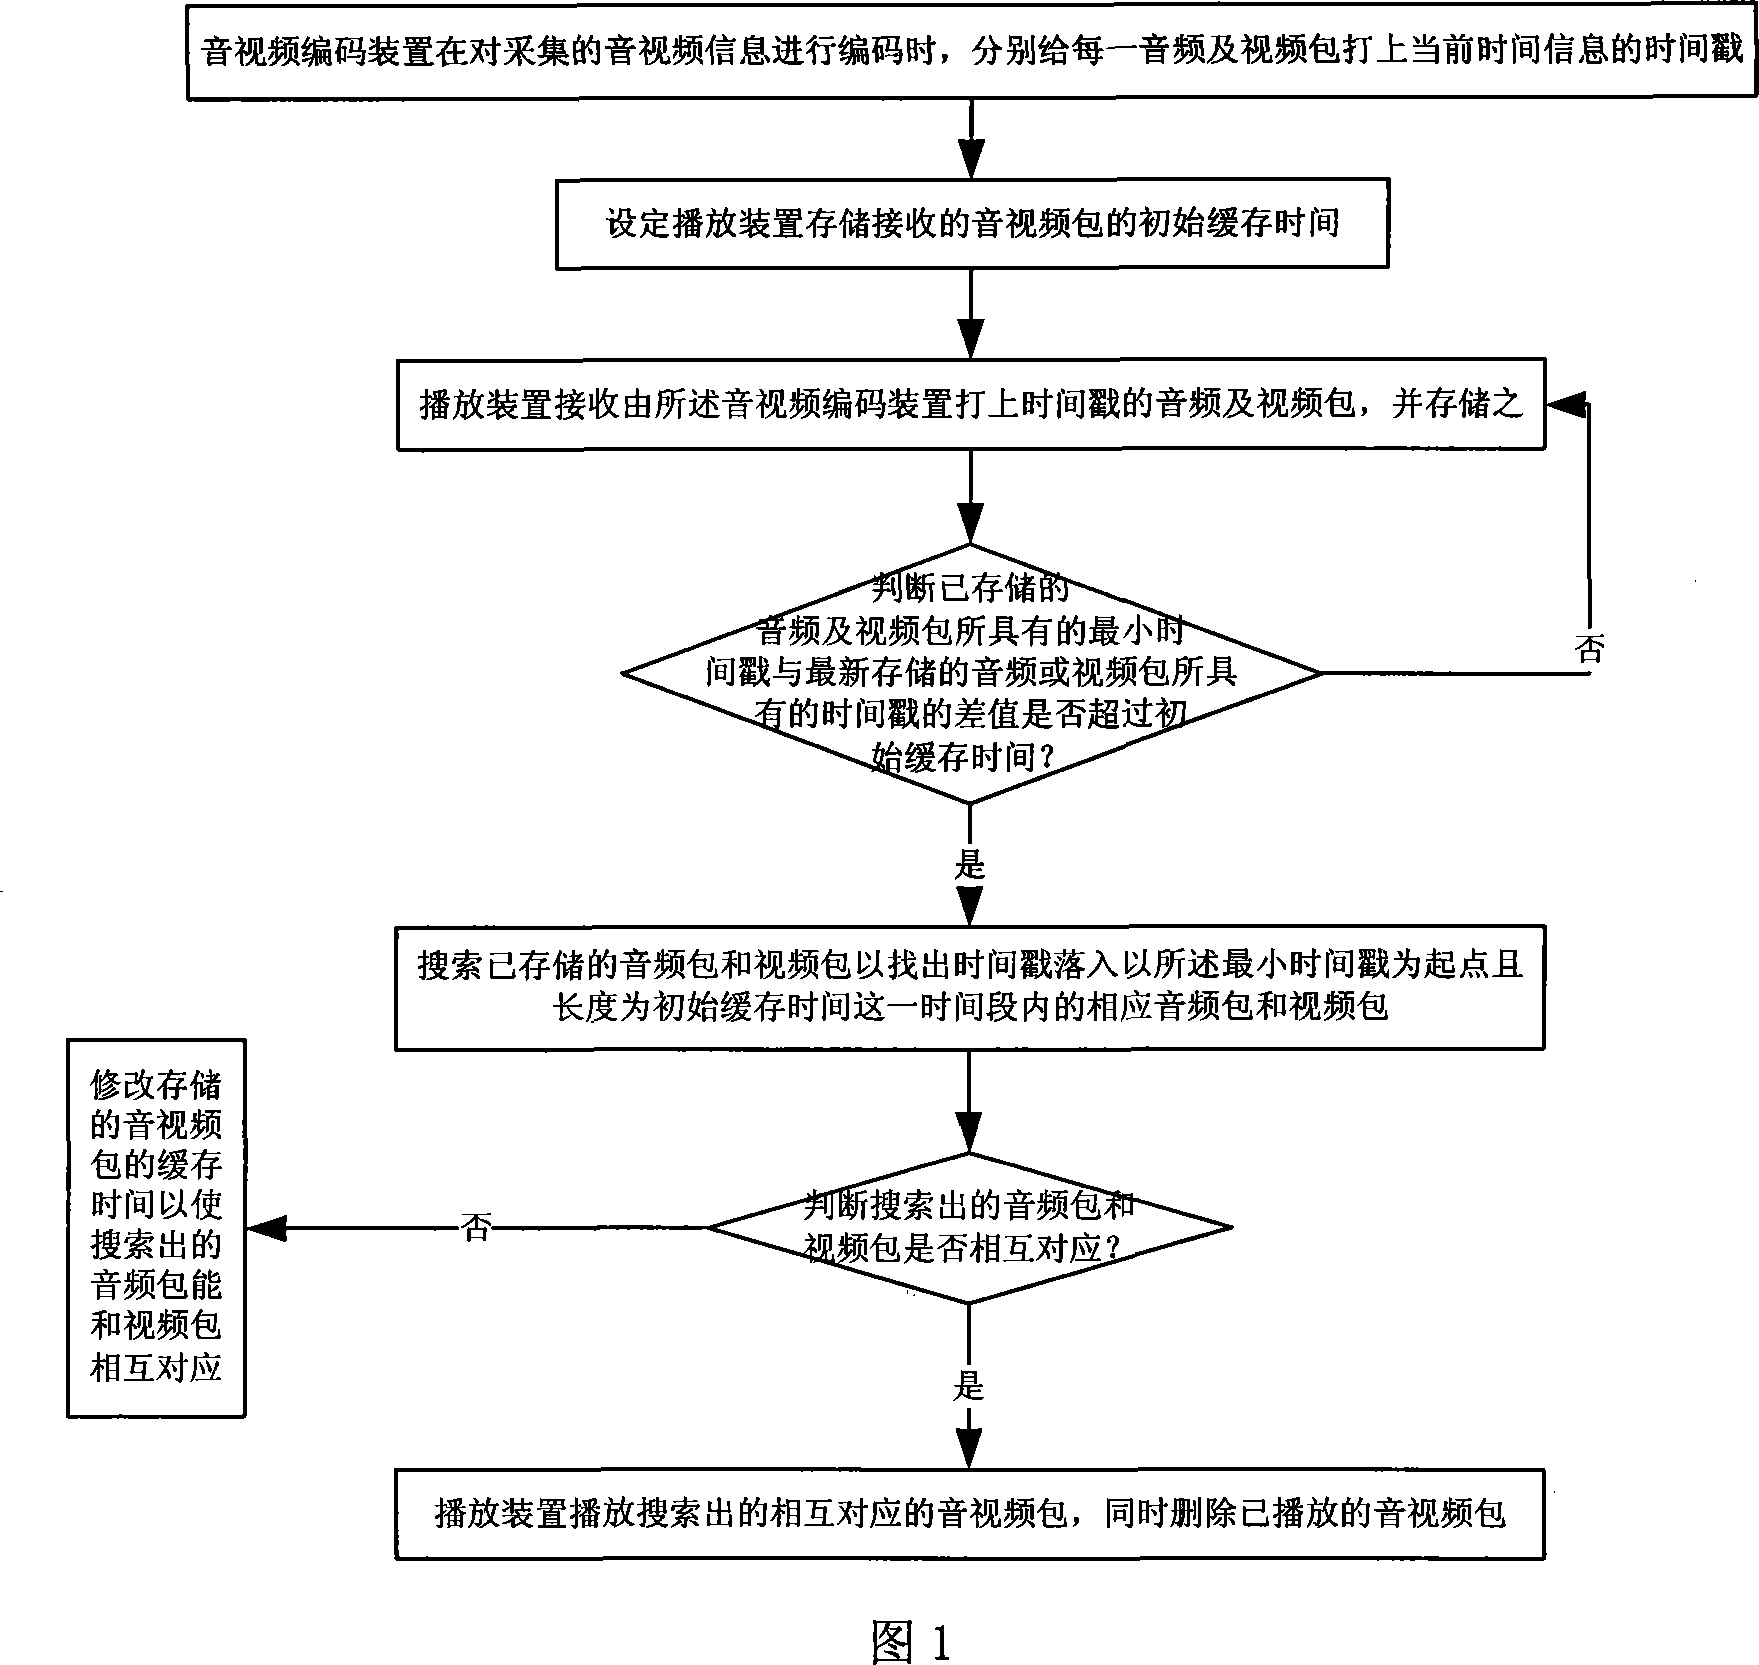 Synchronous playing method for audio and video buffer